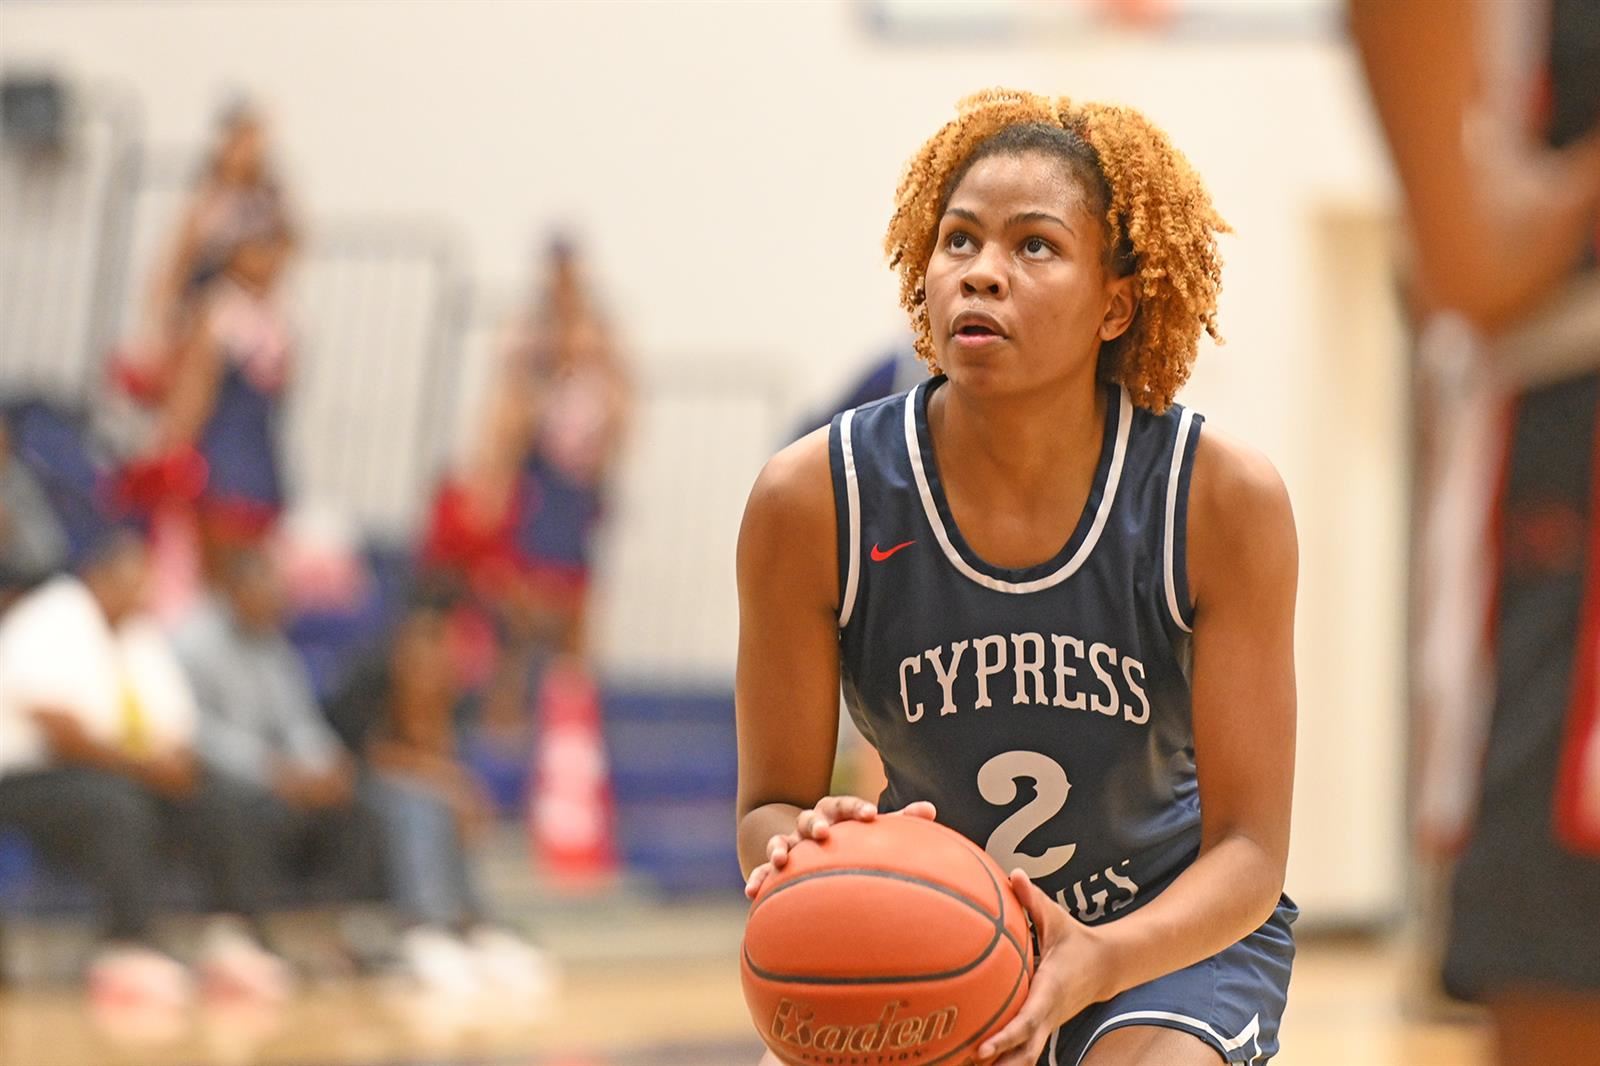 District 16-6A girls’ basketball players earn 2022-2023 league honors.